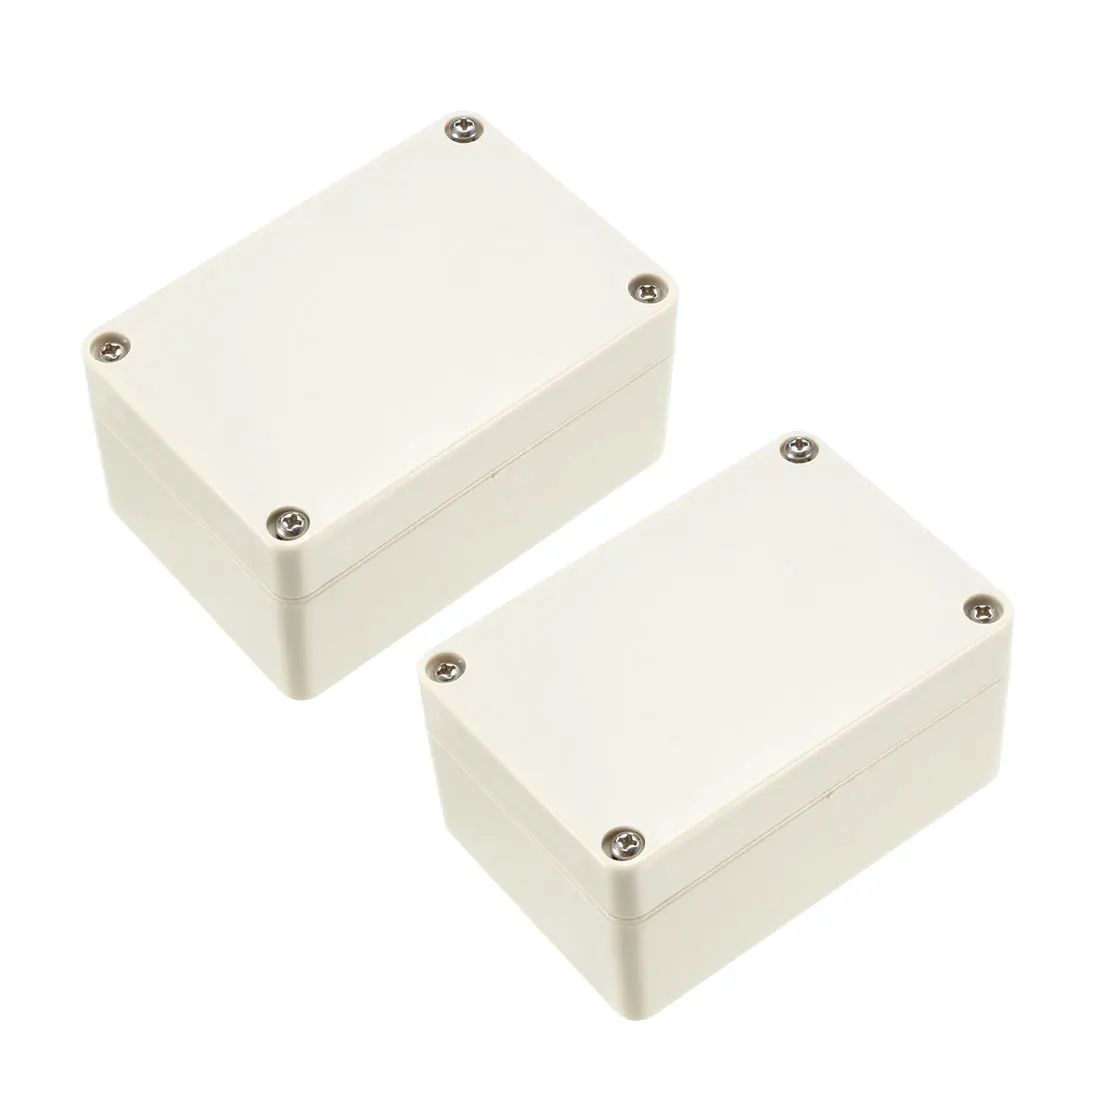 

2pcs 100x68x50mm Plastic ABS Junction Box Electronic Waterproof IP65 Sealed DIY Junction Box Enclosure Project Instrument Case